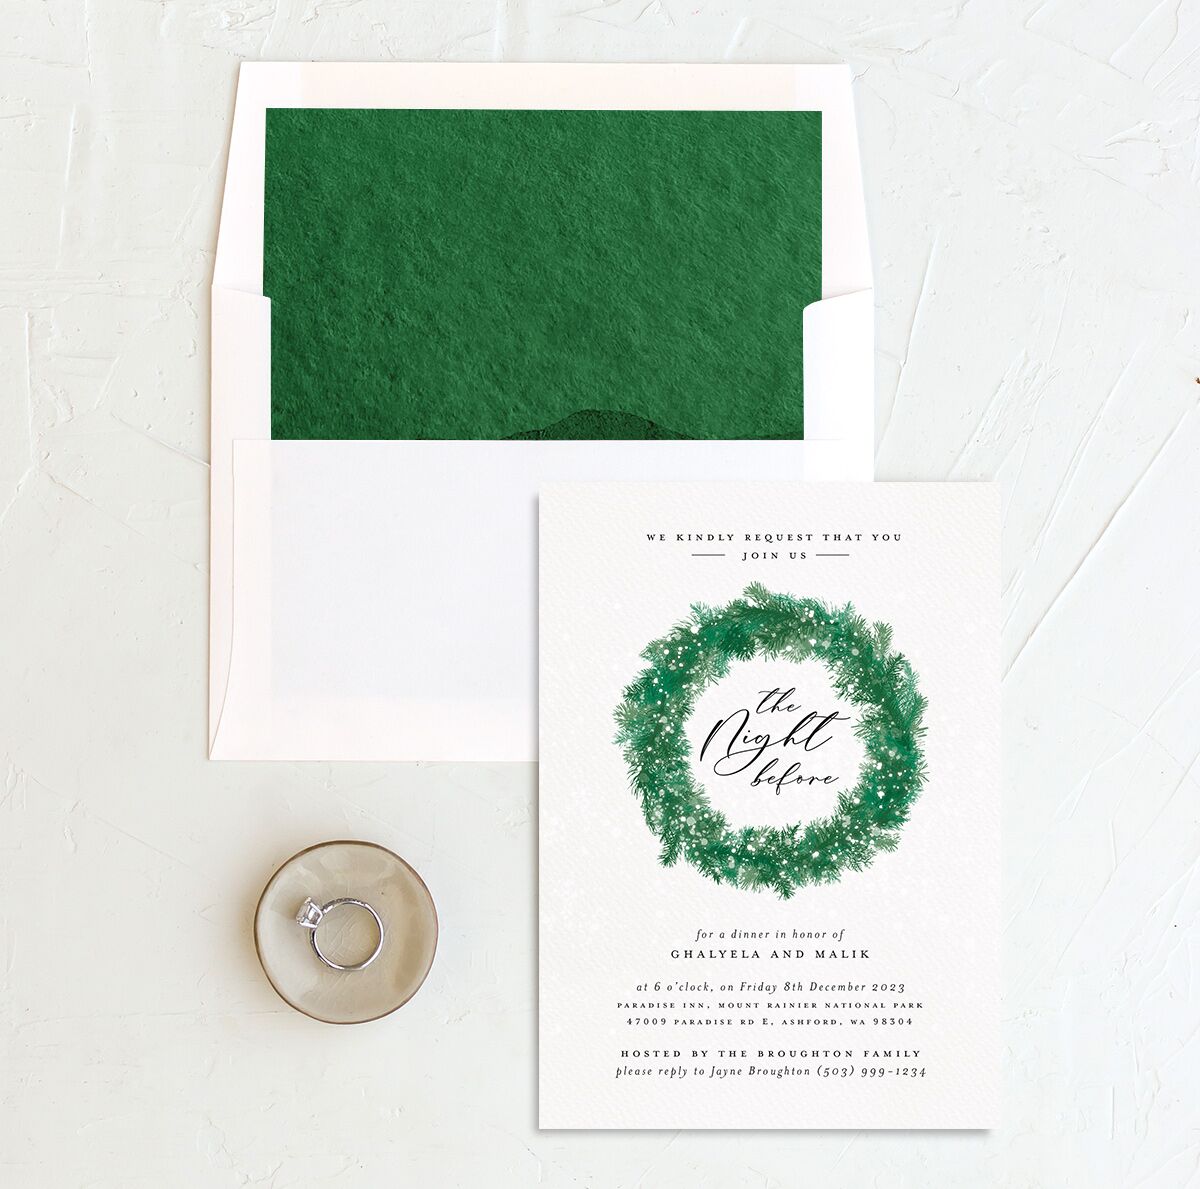 Snowy Wreath Rehearsal Dinner Invitations envelope-and-liner in green